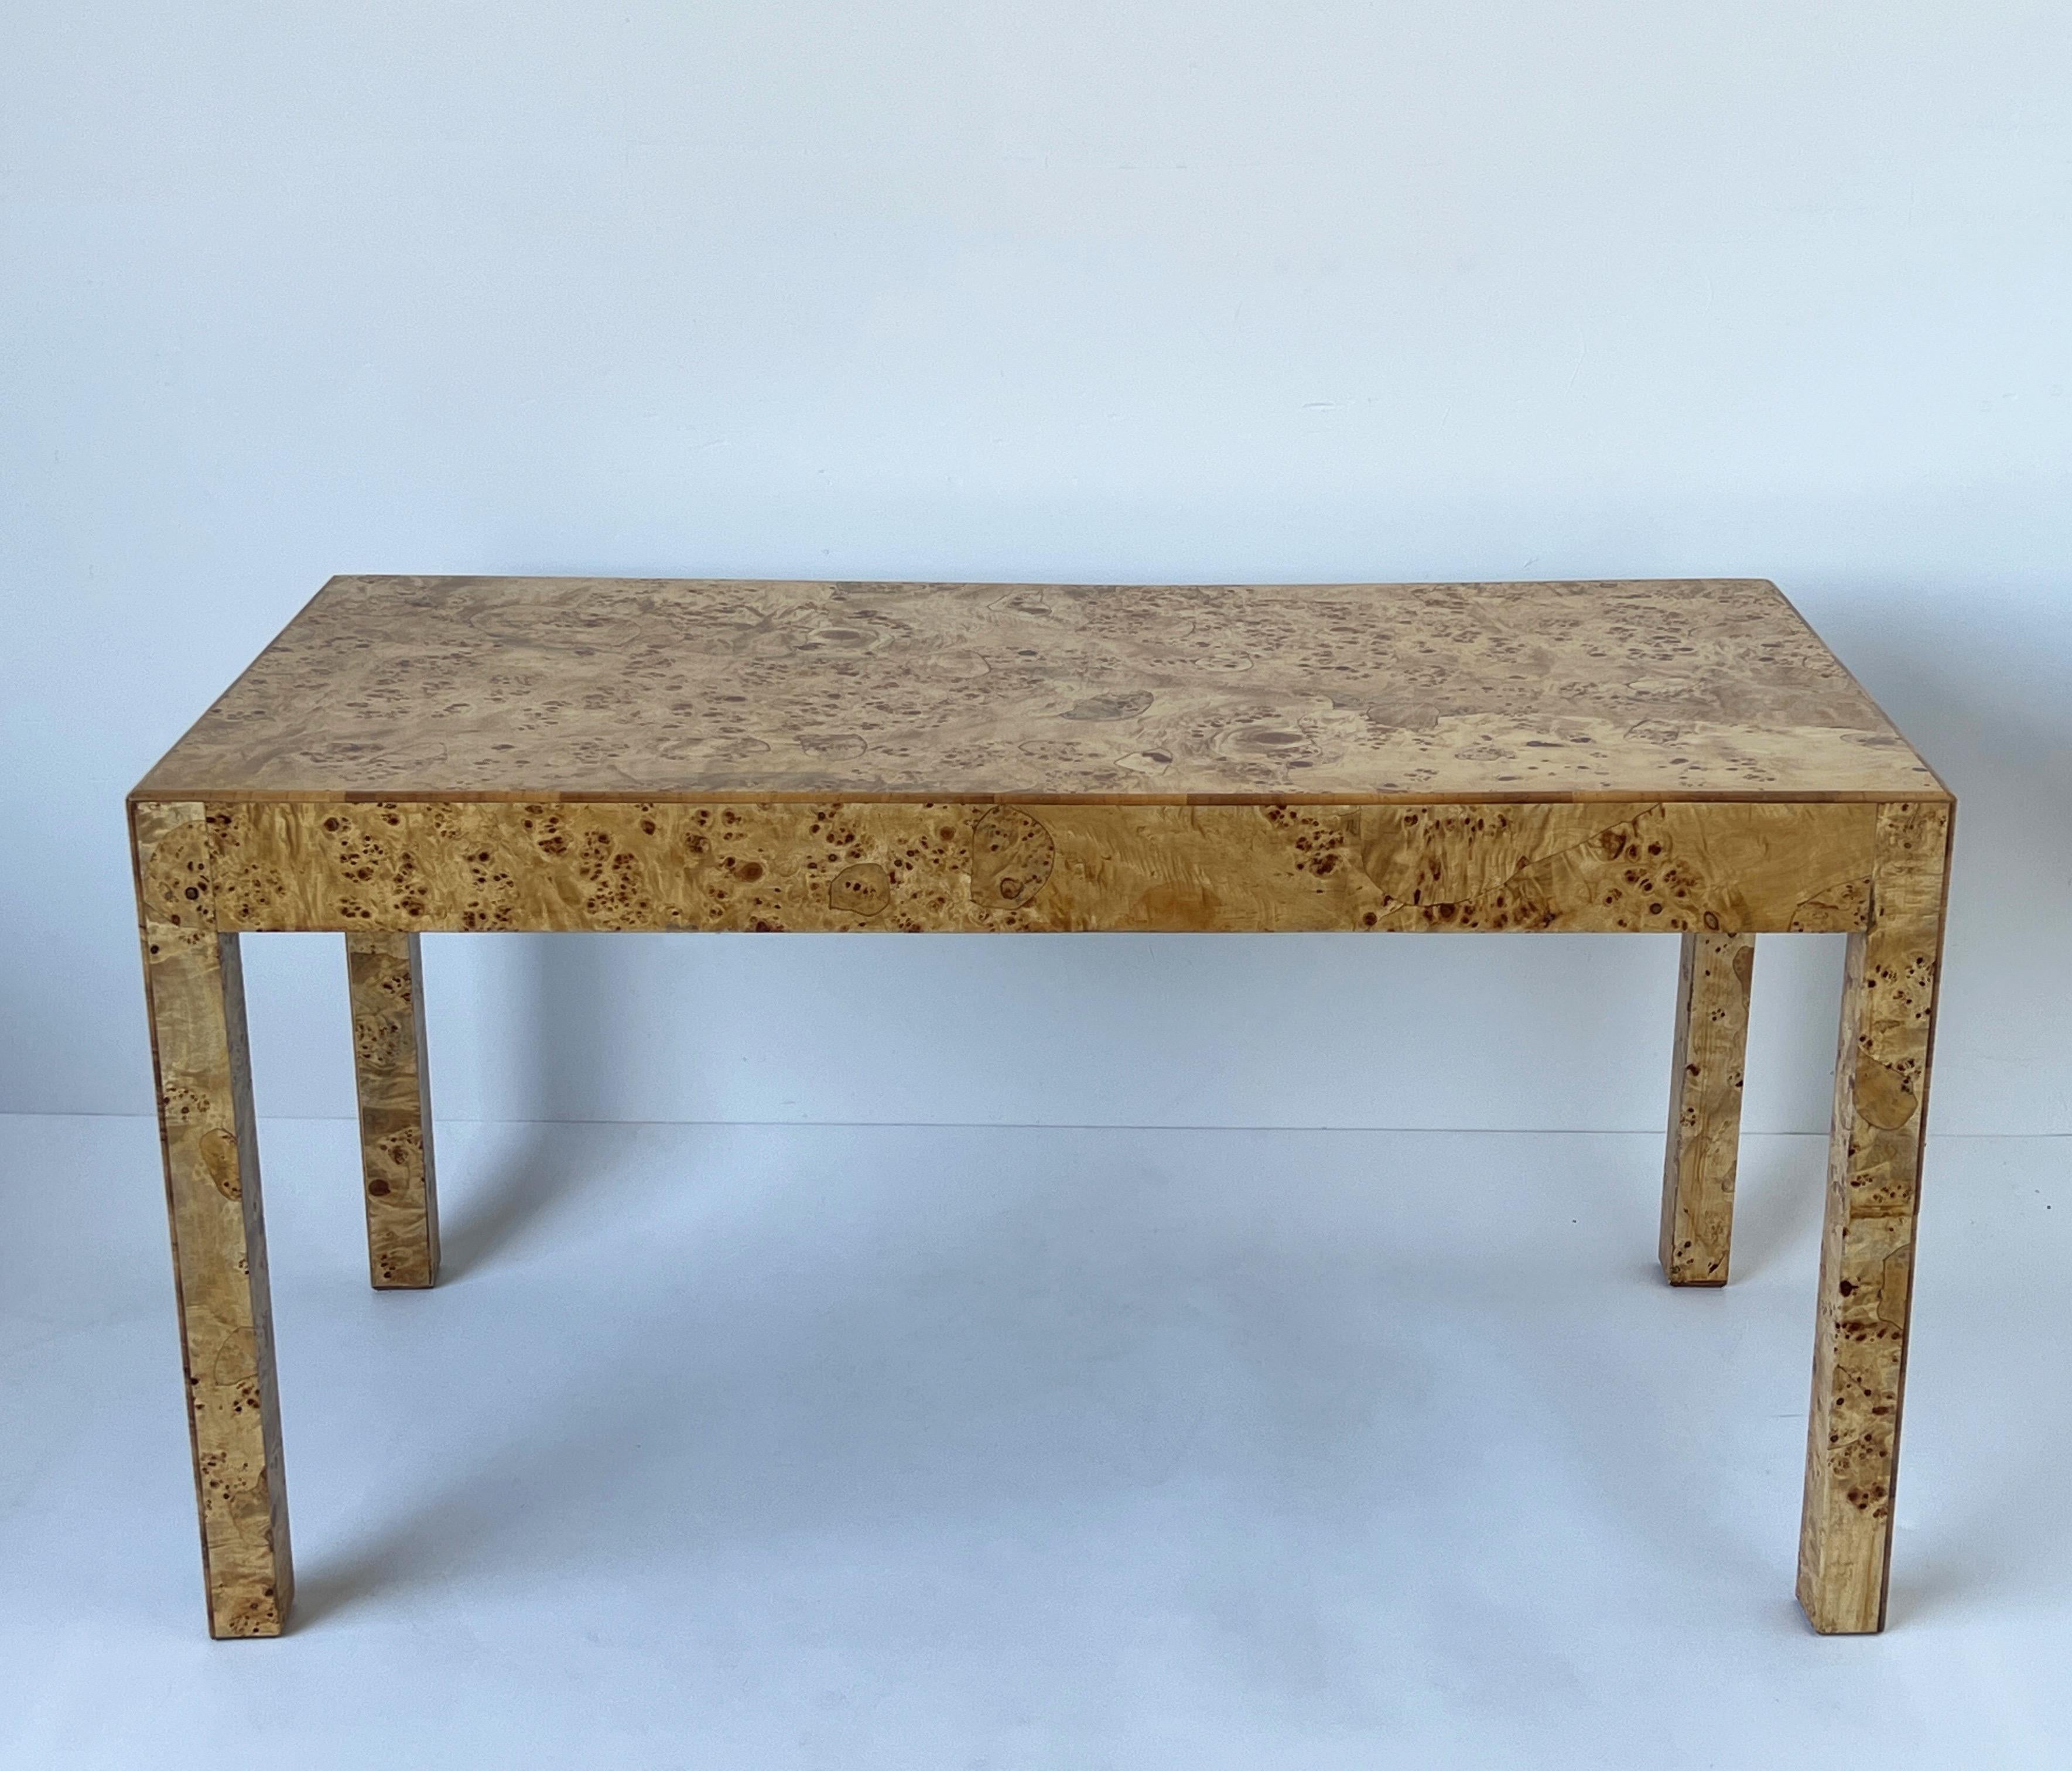 burl wood desk with drawers